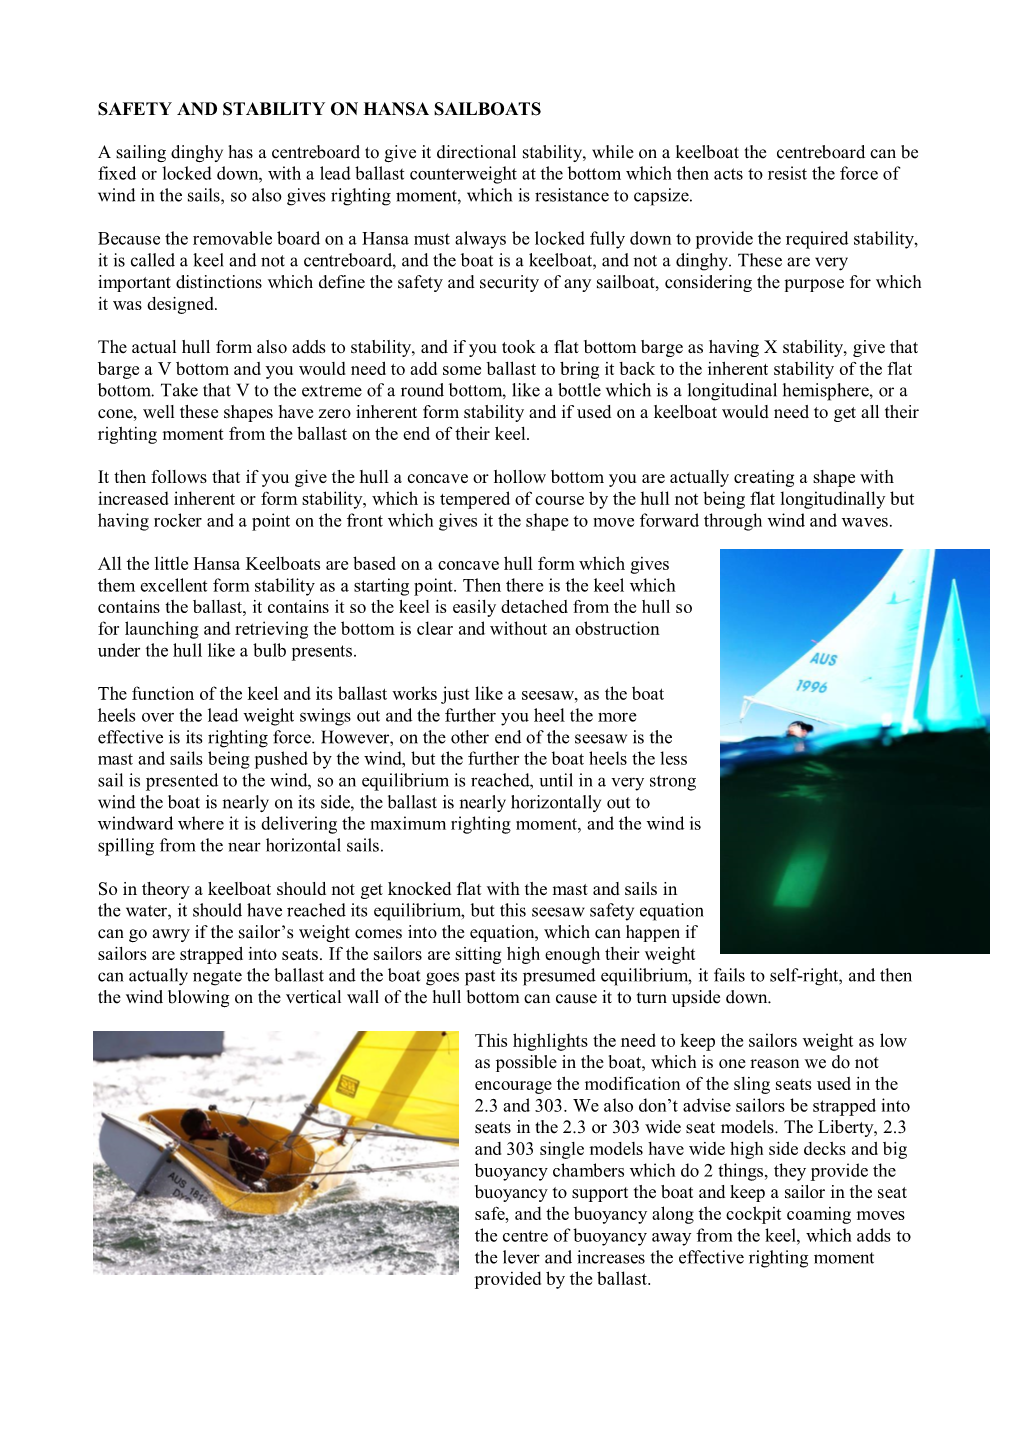 SAFETY and STABILITY on HANSA SAILBOATS a Sailing Dinghy Has A